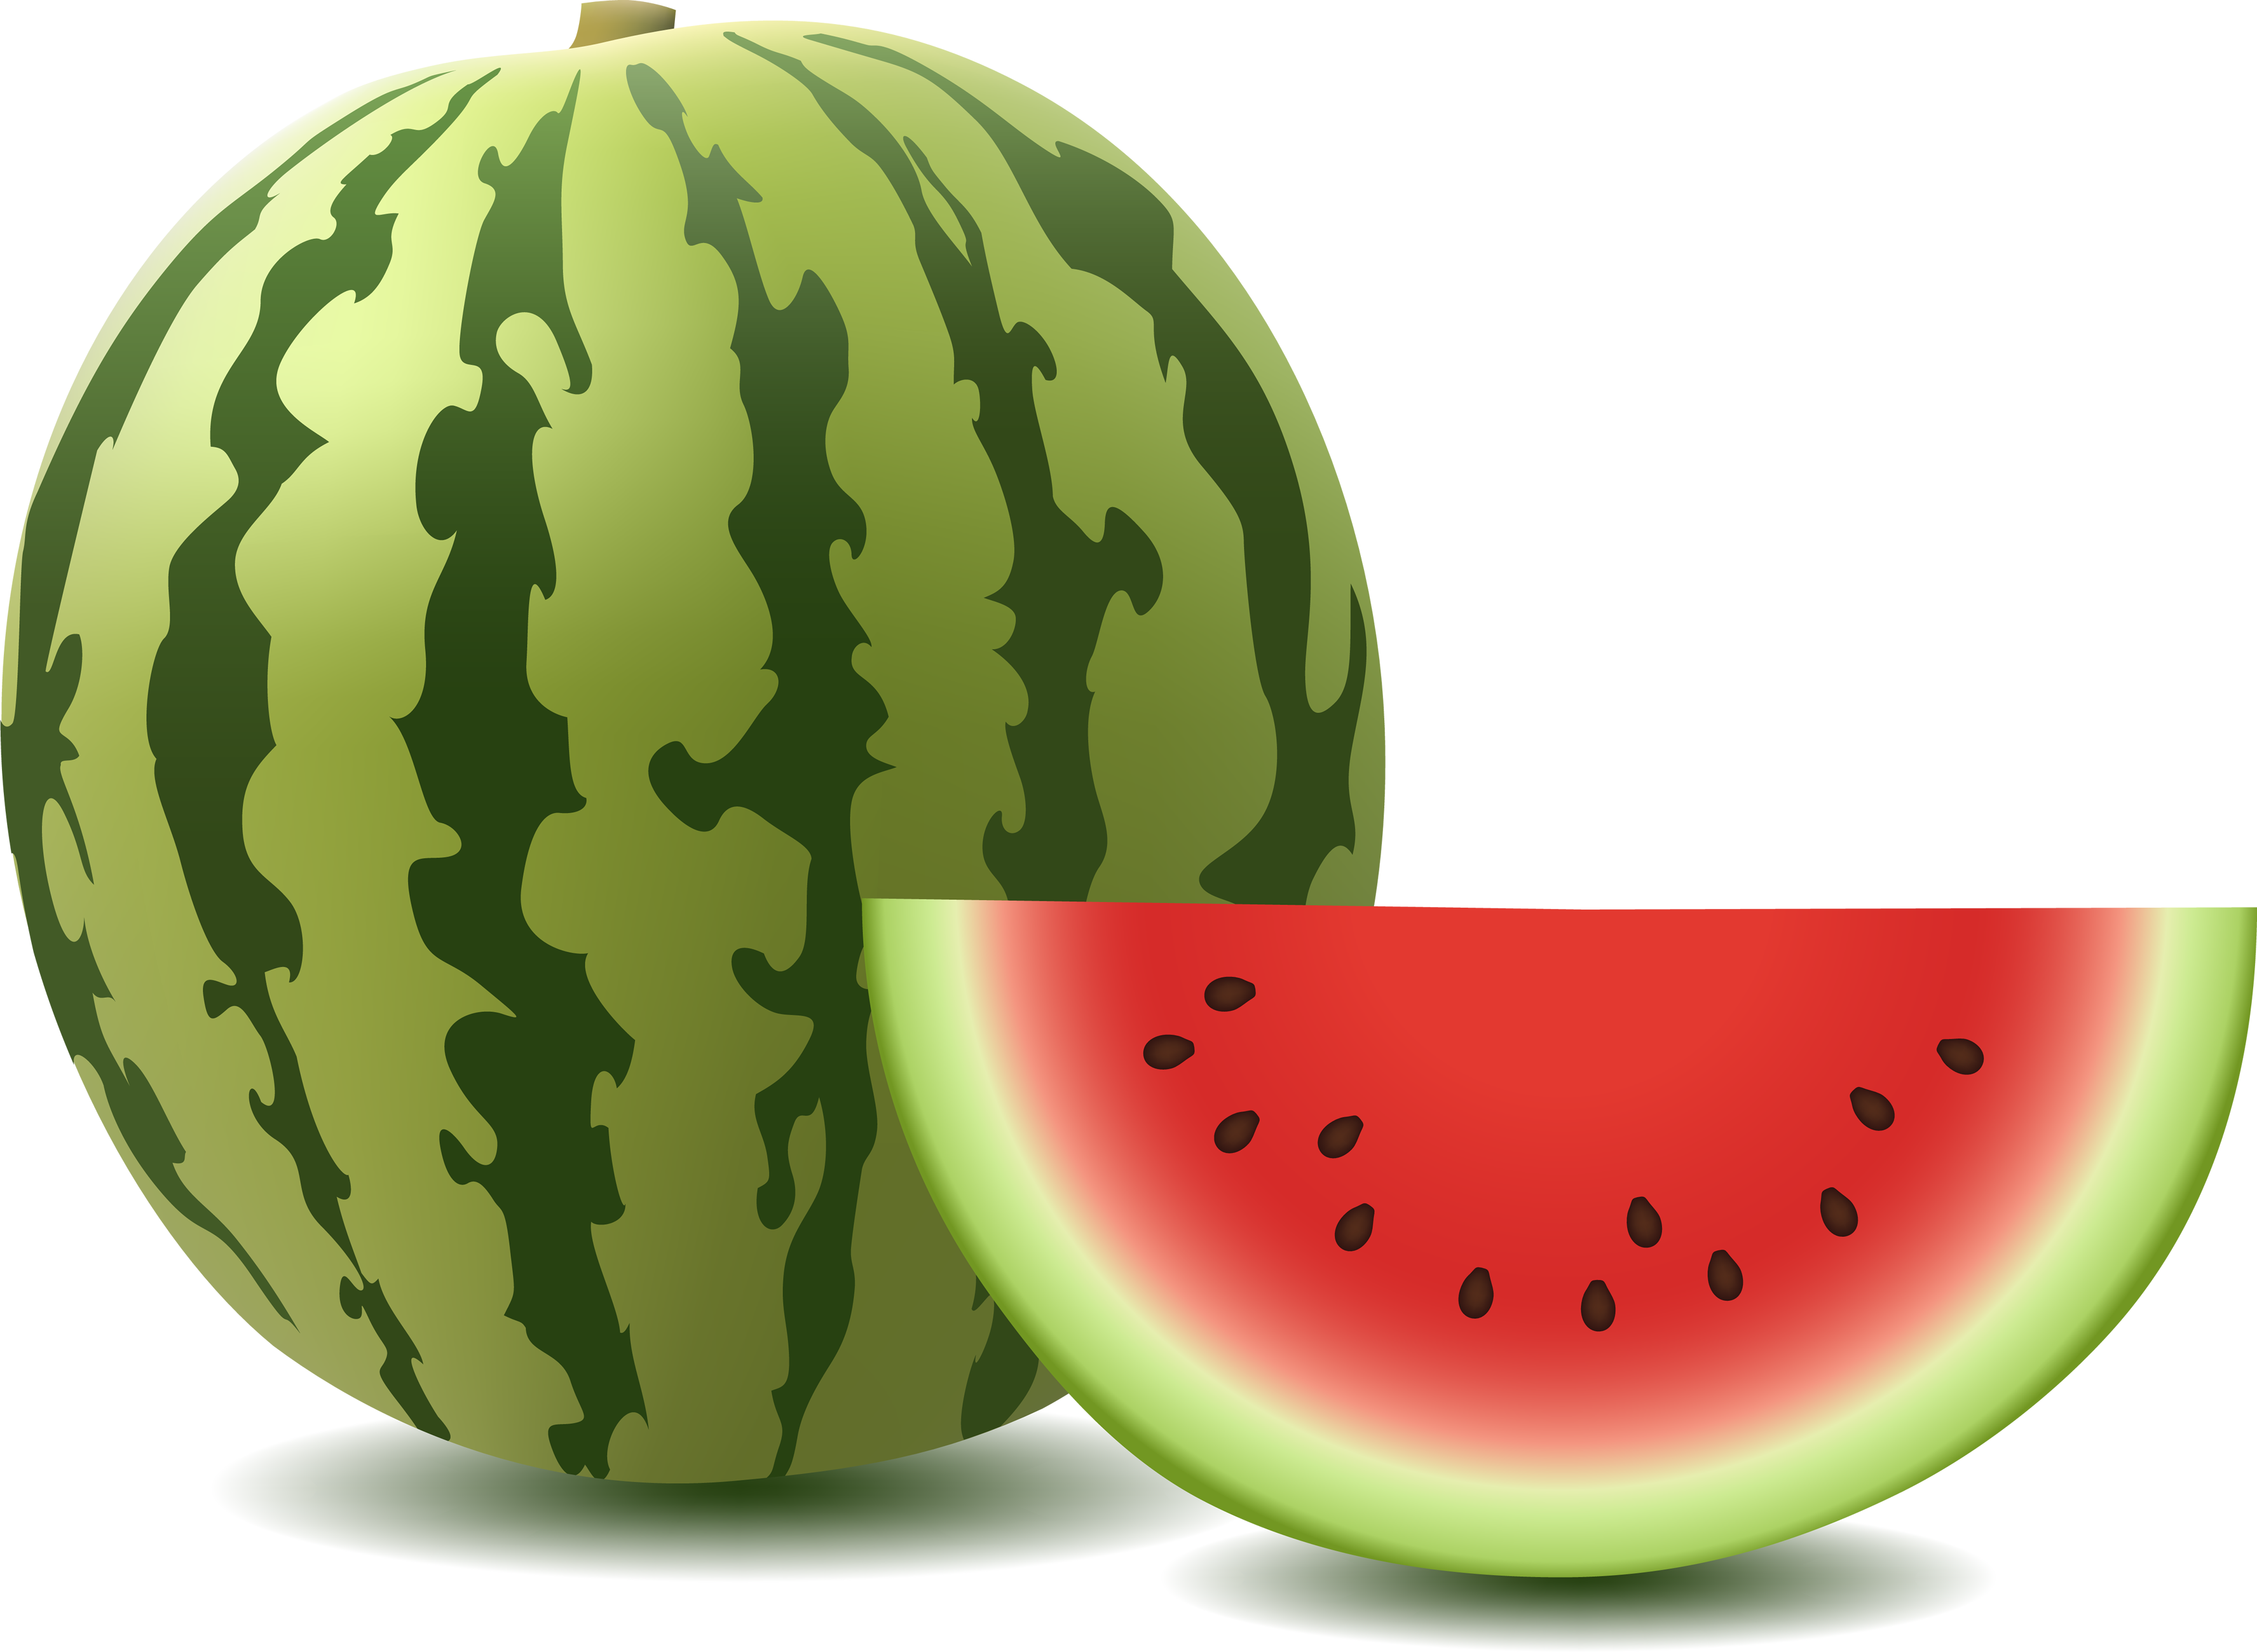 Png images free download. Fruits clipart watermelon